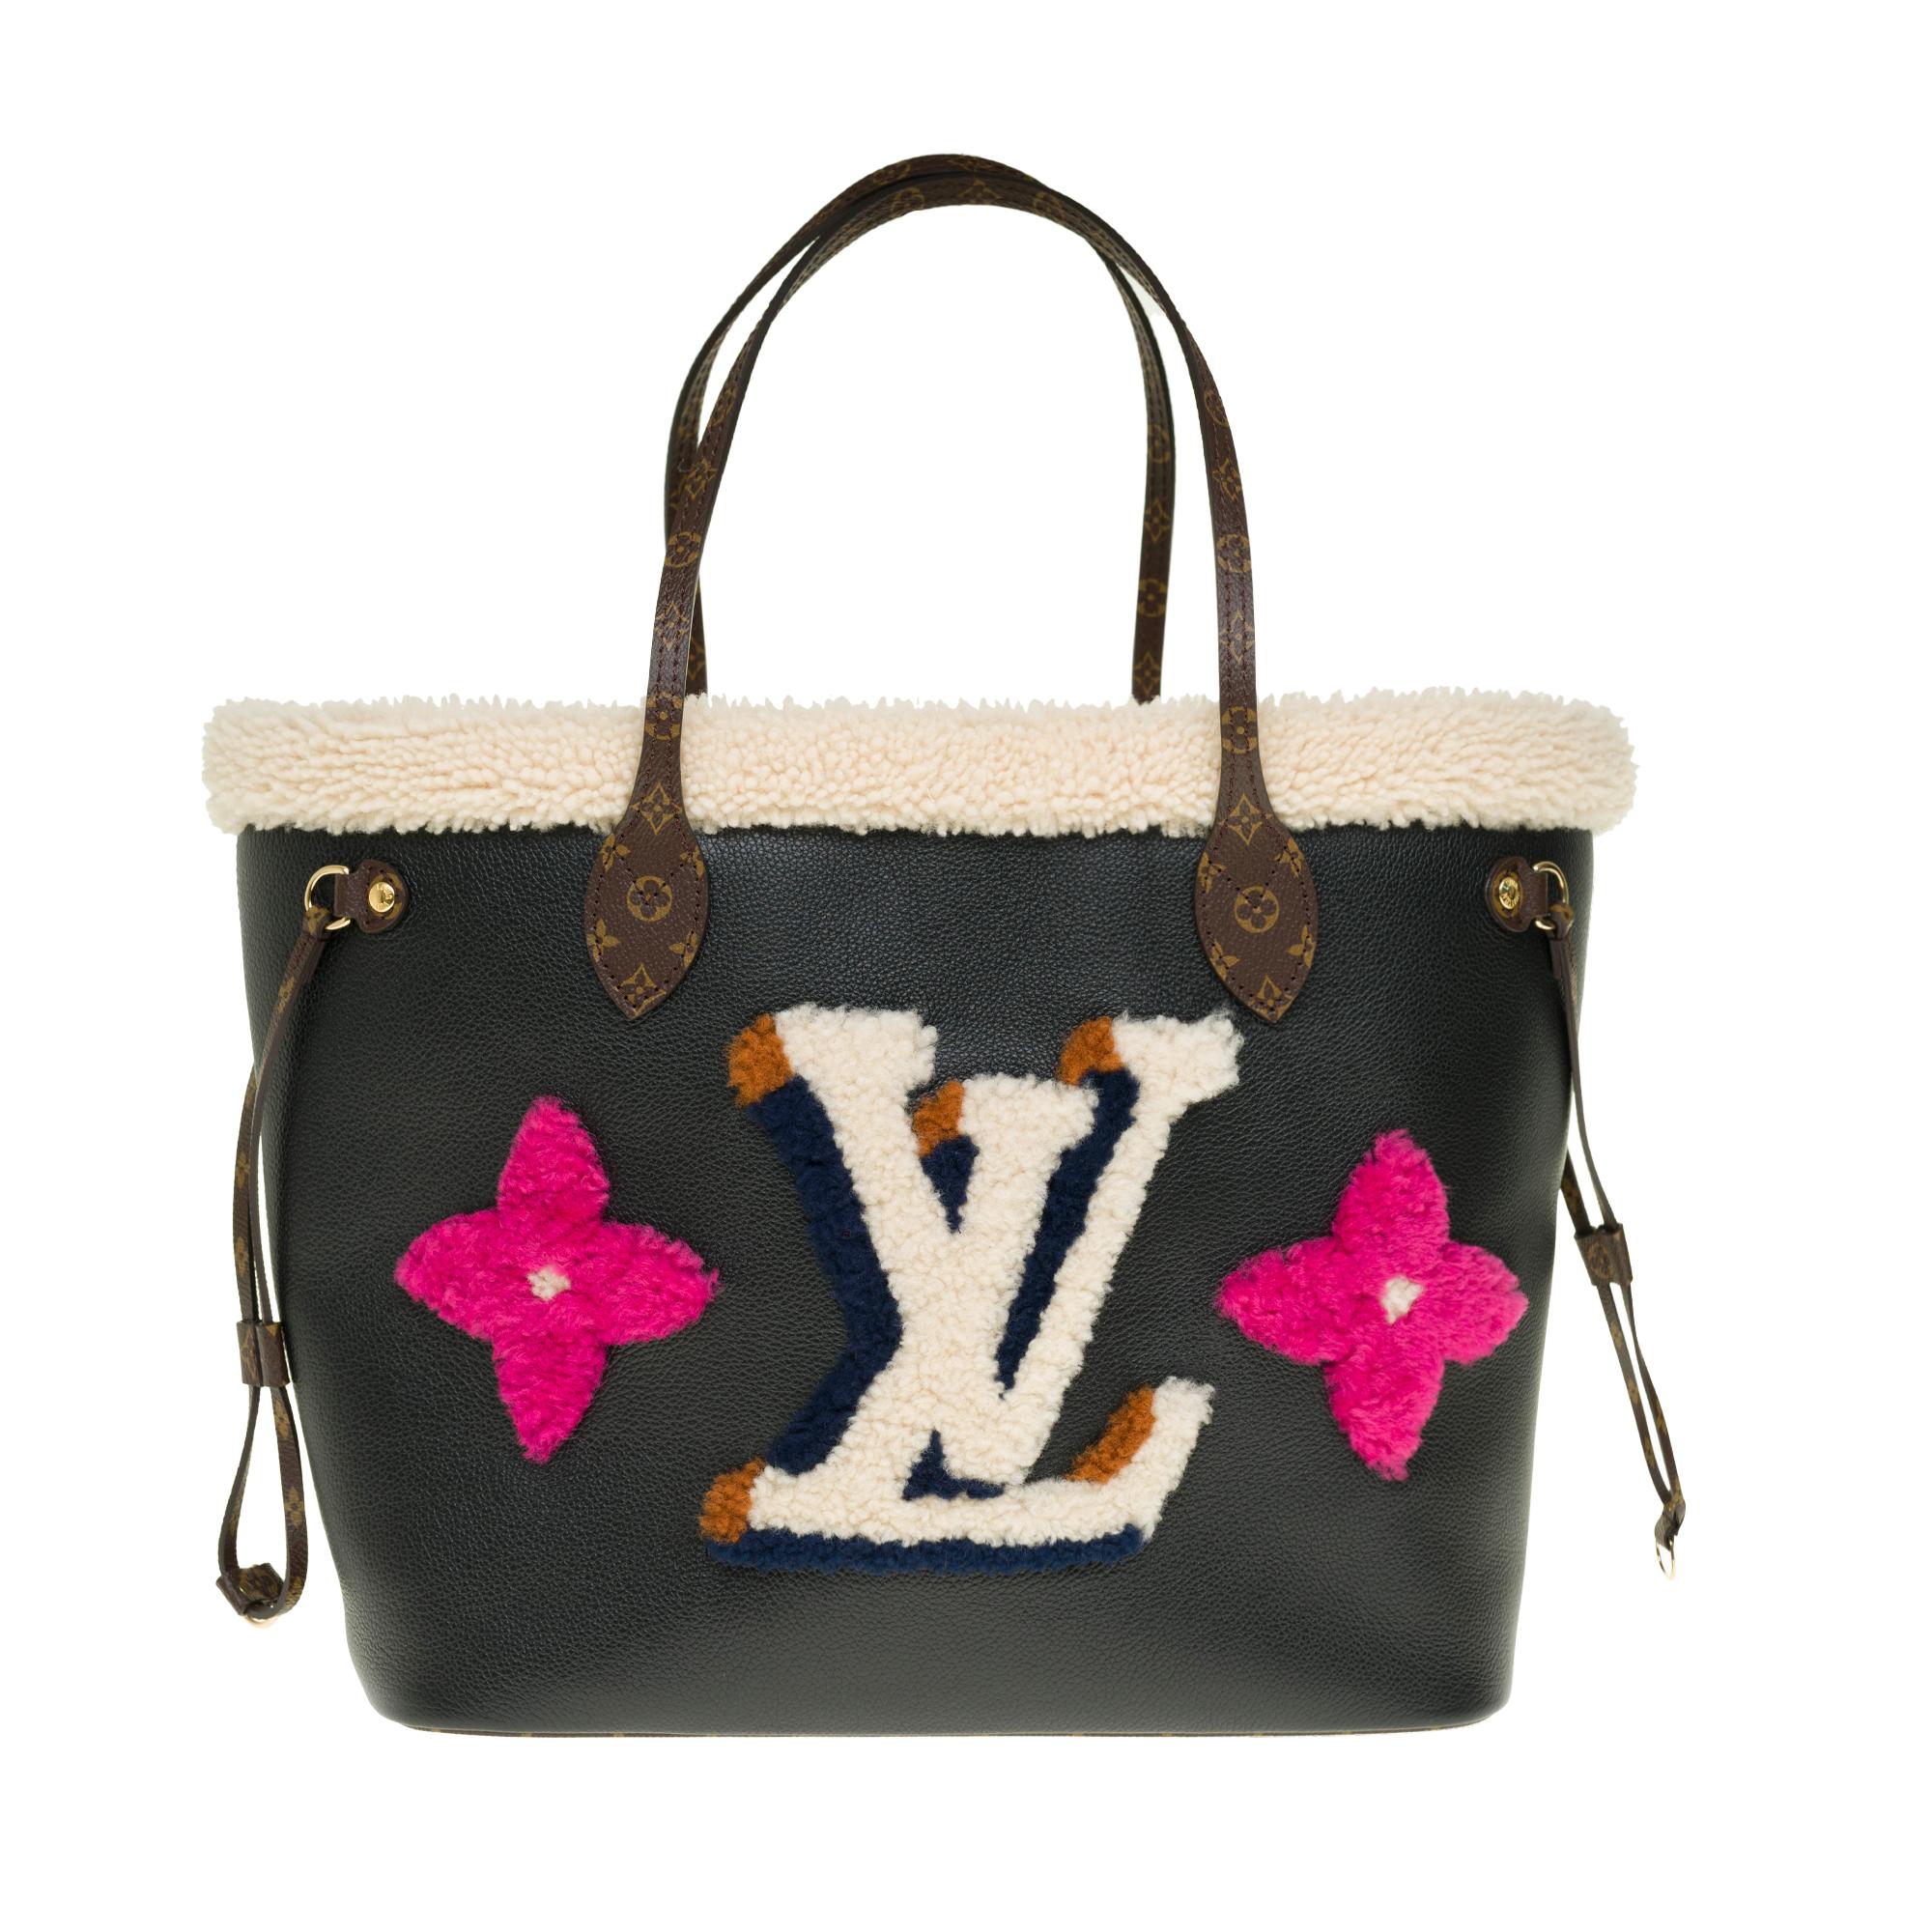 
LIMITED EDITION - SOLD OUT!

This Neverfull MM bag features ultra-soft black grained leather and luxurious shearling trim. It is decorated with LV Initials and Monogram flowers created by a shearling patchwork of various colors. Laces on the sides